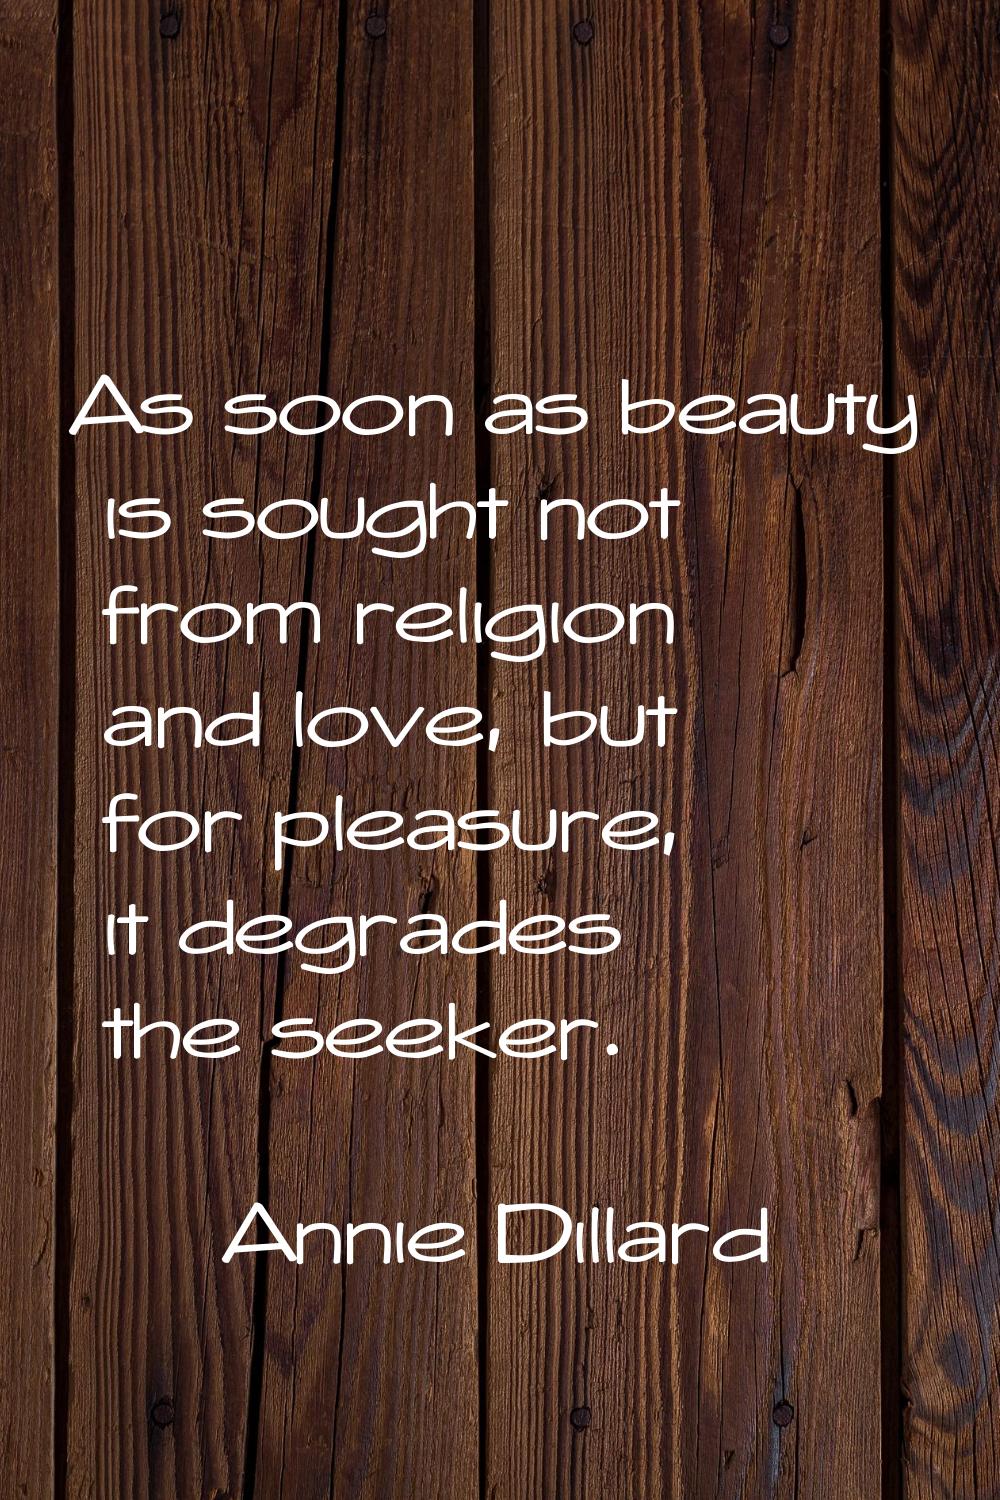 As soon as beauty is sought not from religion and love, but for pleasure, it degrades the seeker.